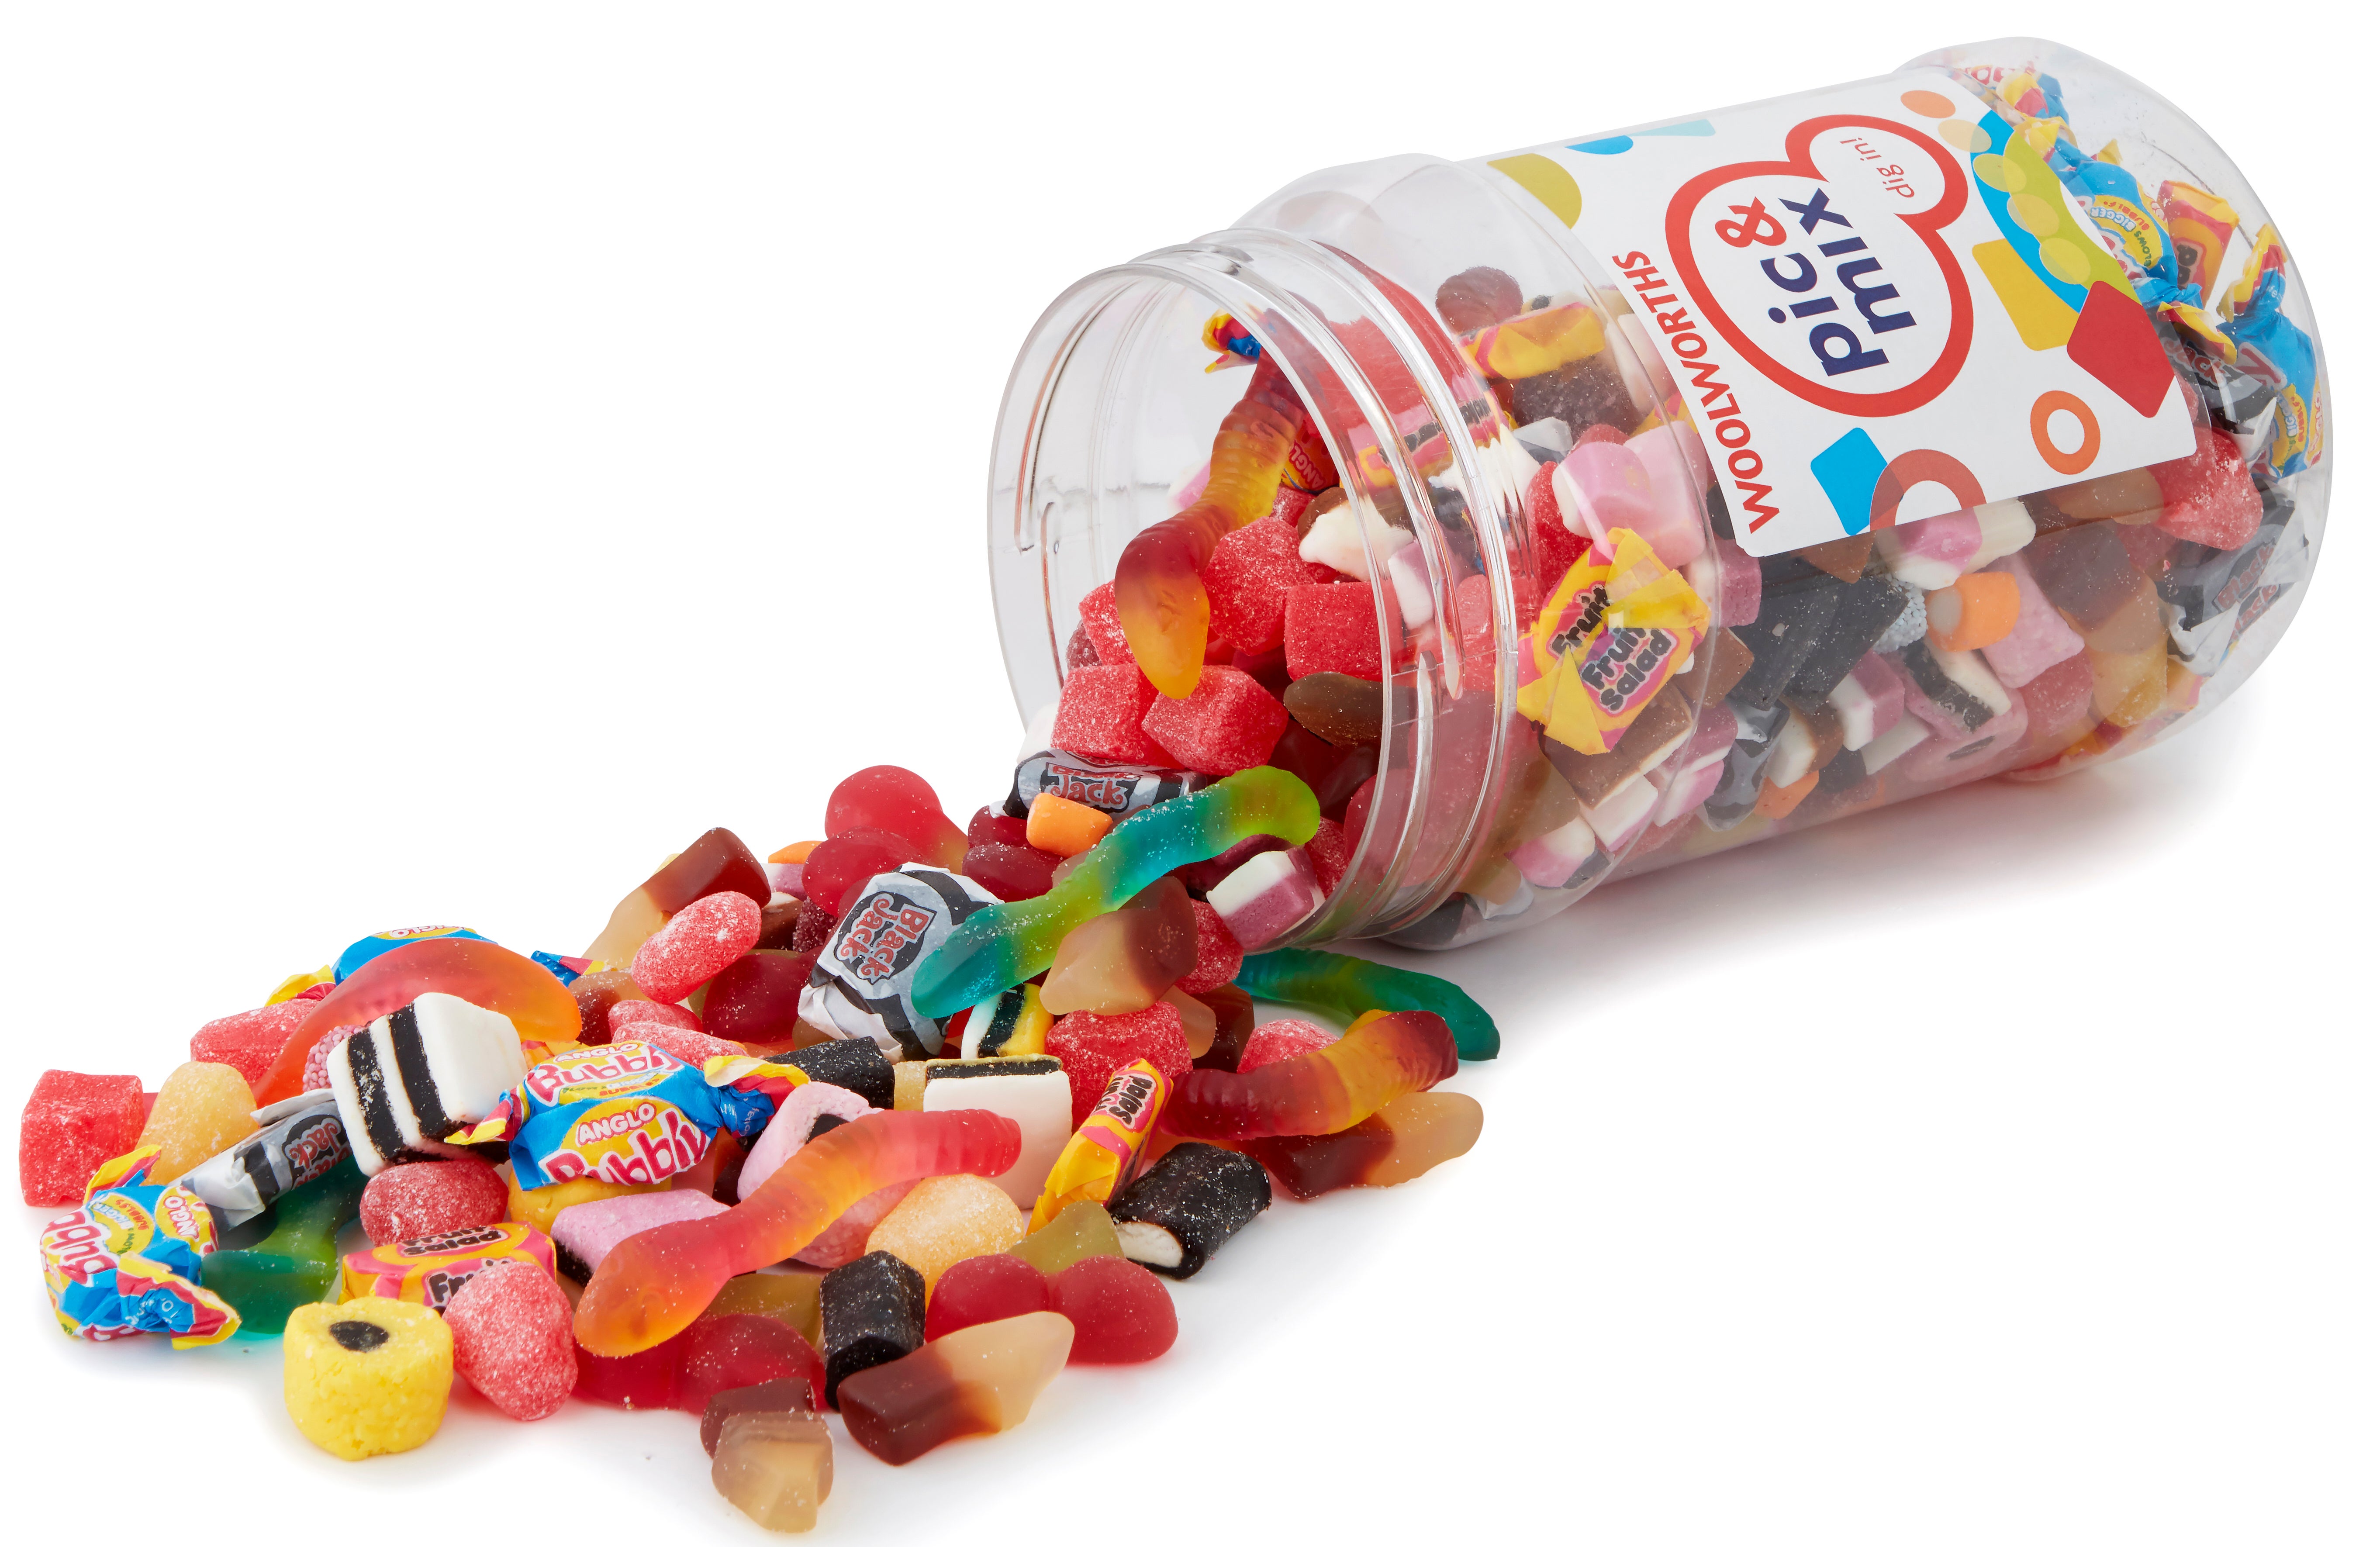 Woolworths Pic’n Mix jar is back and filled with familiar favourites